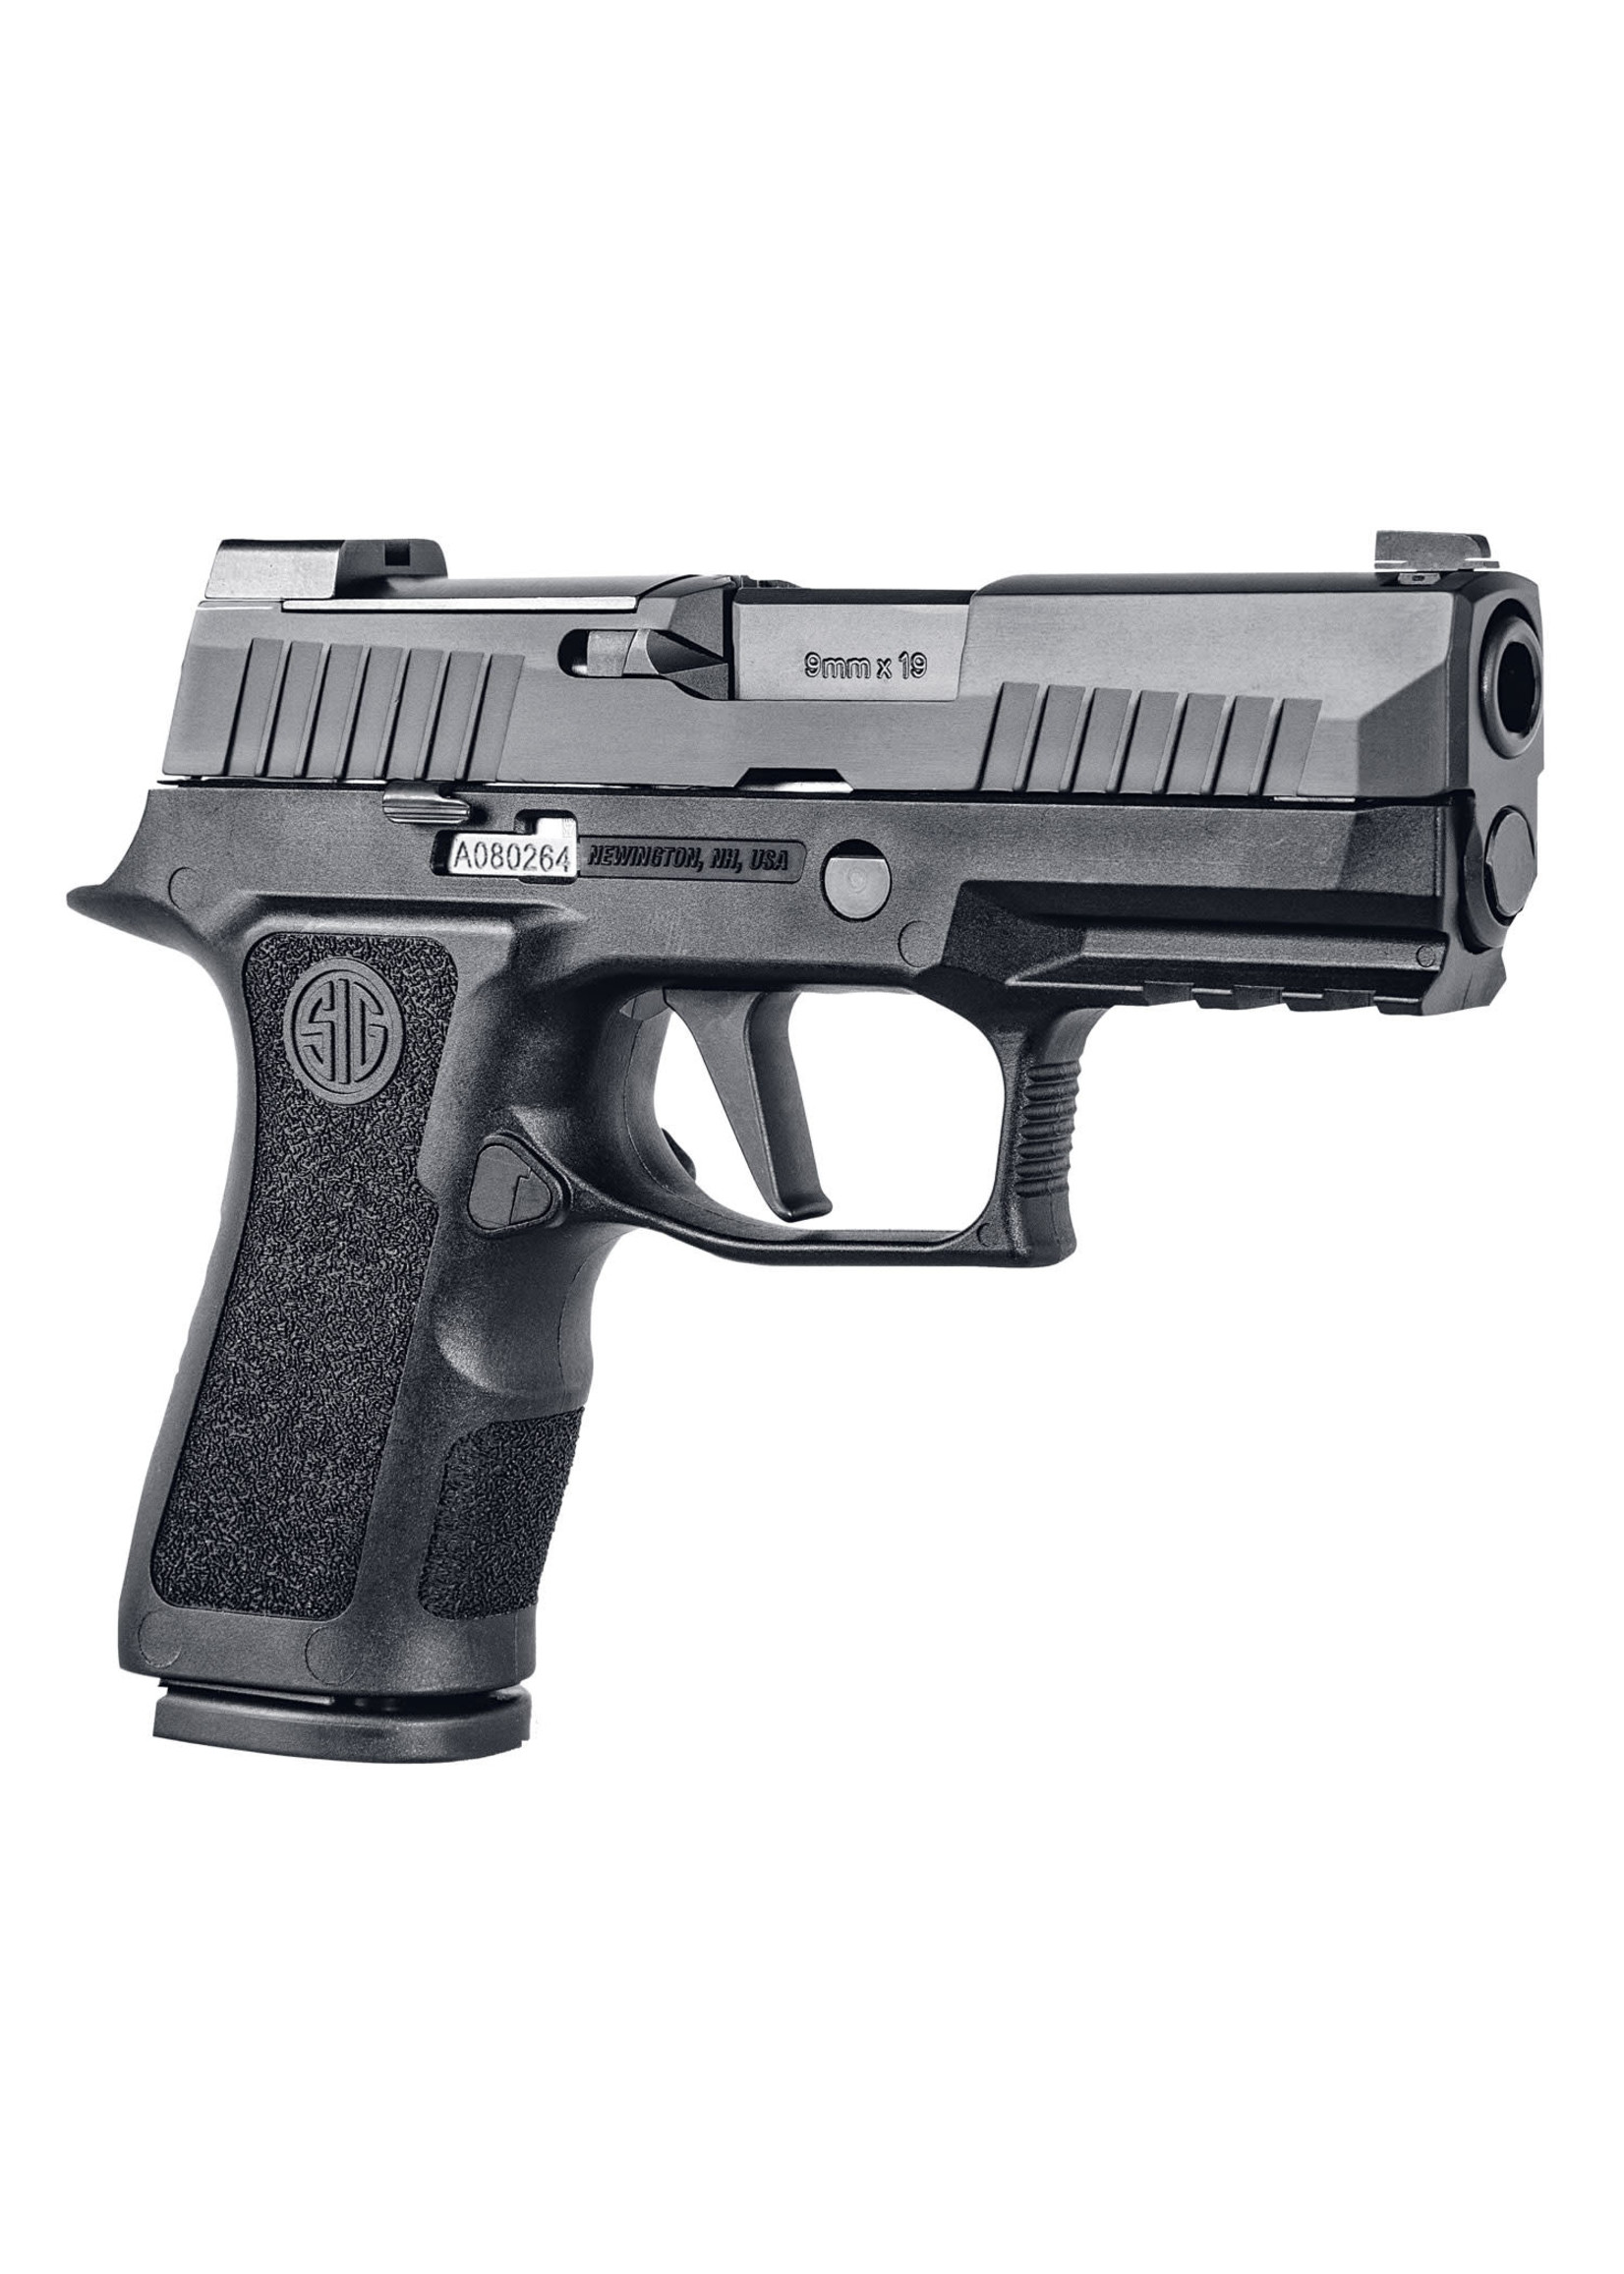 Sig Sauer Sig Sauer P320 XCompact 9mm Luger Caliber with 3.60" Barrel, 15+1 Capacity, Overall Black Finish Stainless Steel, Picatinny Rail Frame, Serrated Nitron Slide, Polymer Grip & XRAY3 Day/Night Sights